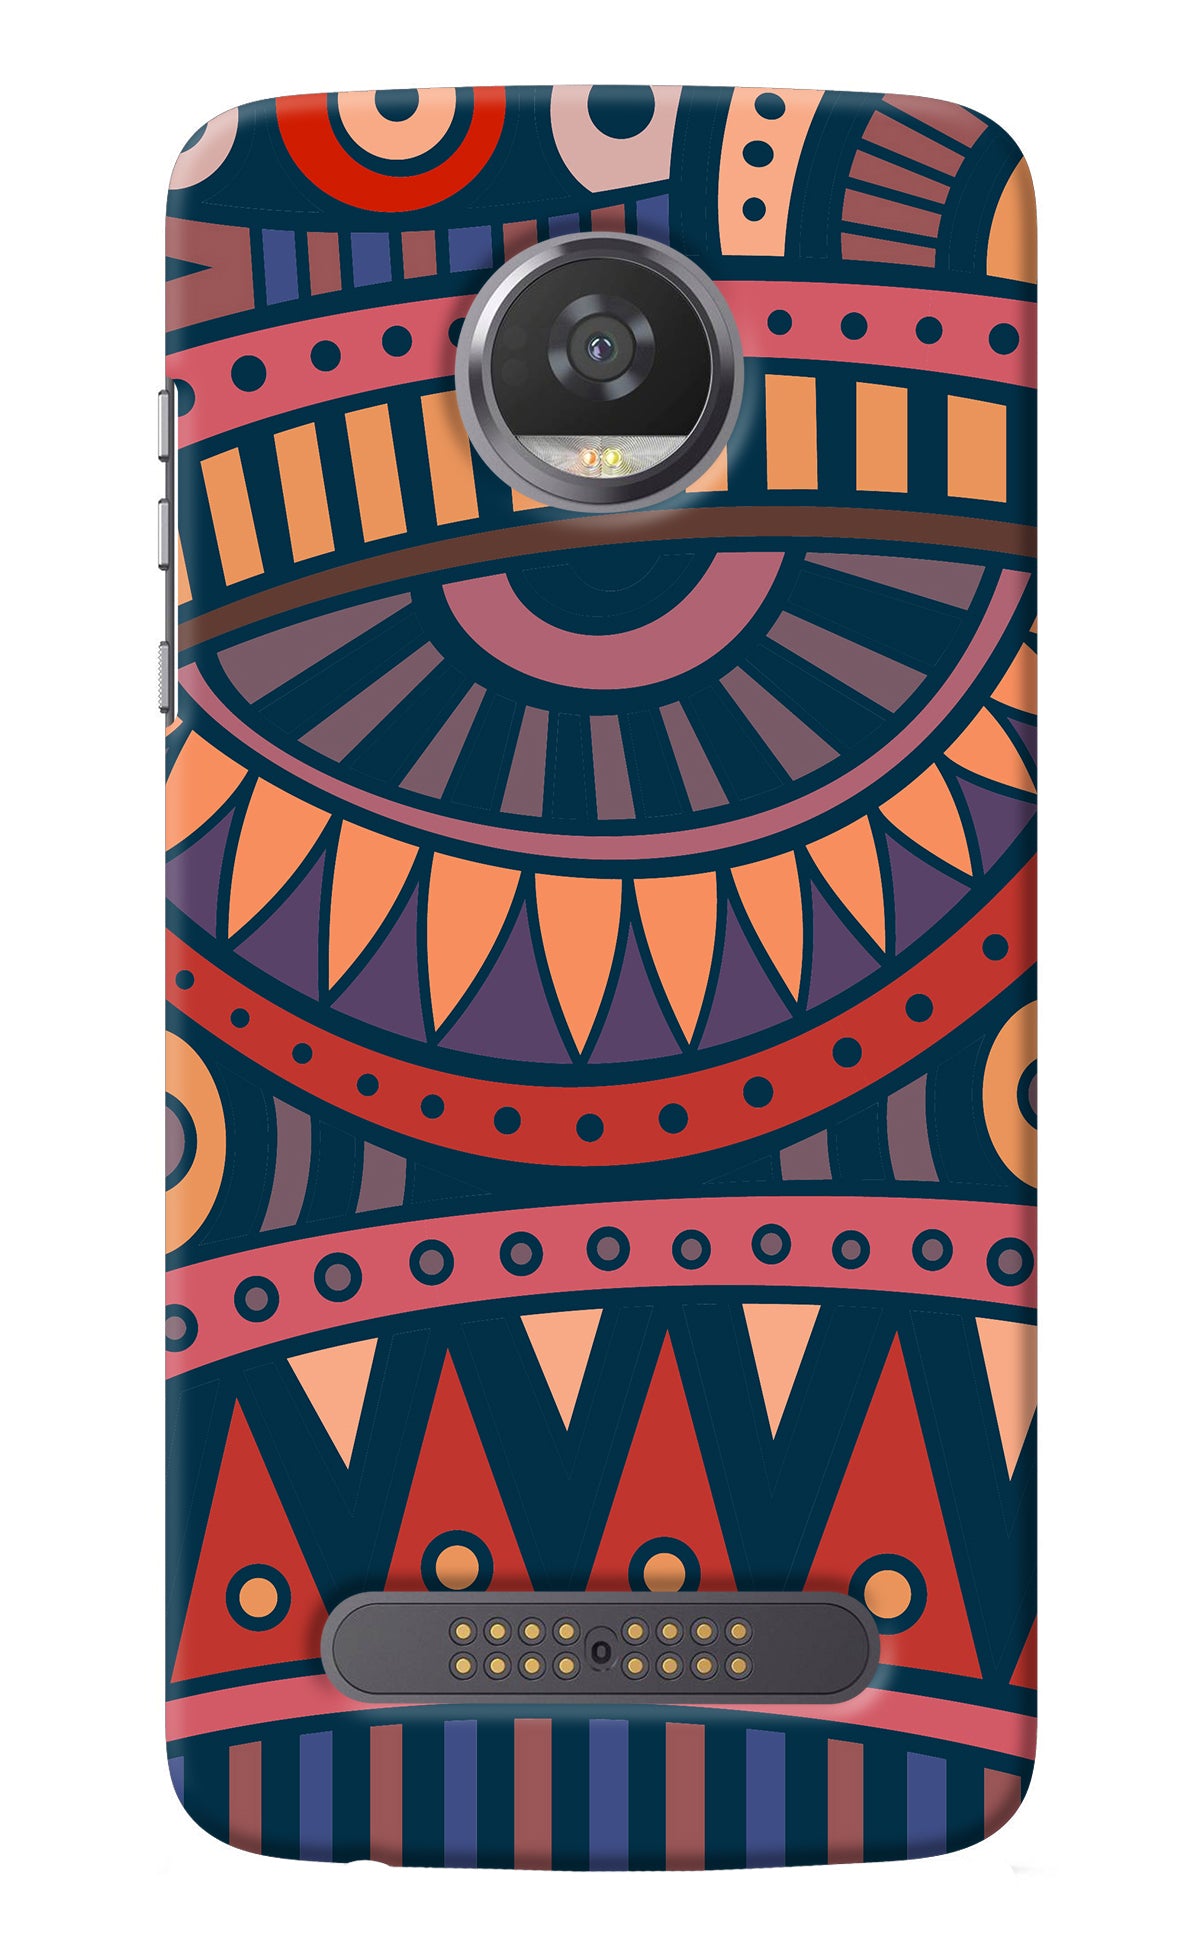 African Culture Design Moto Z2 Play Back Cover